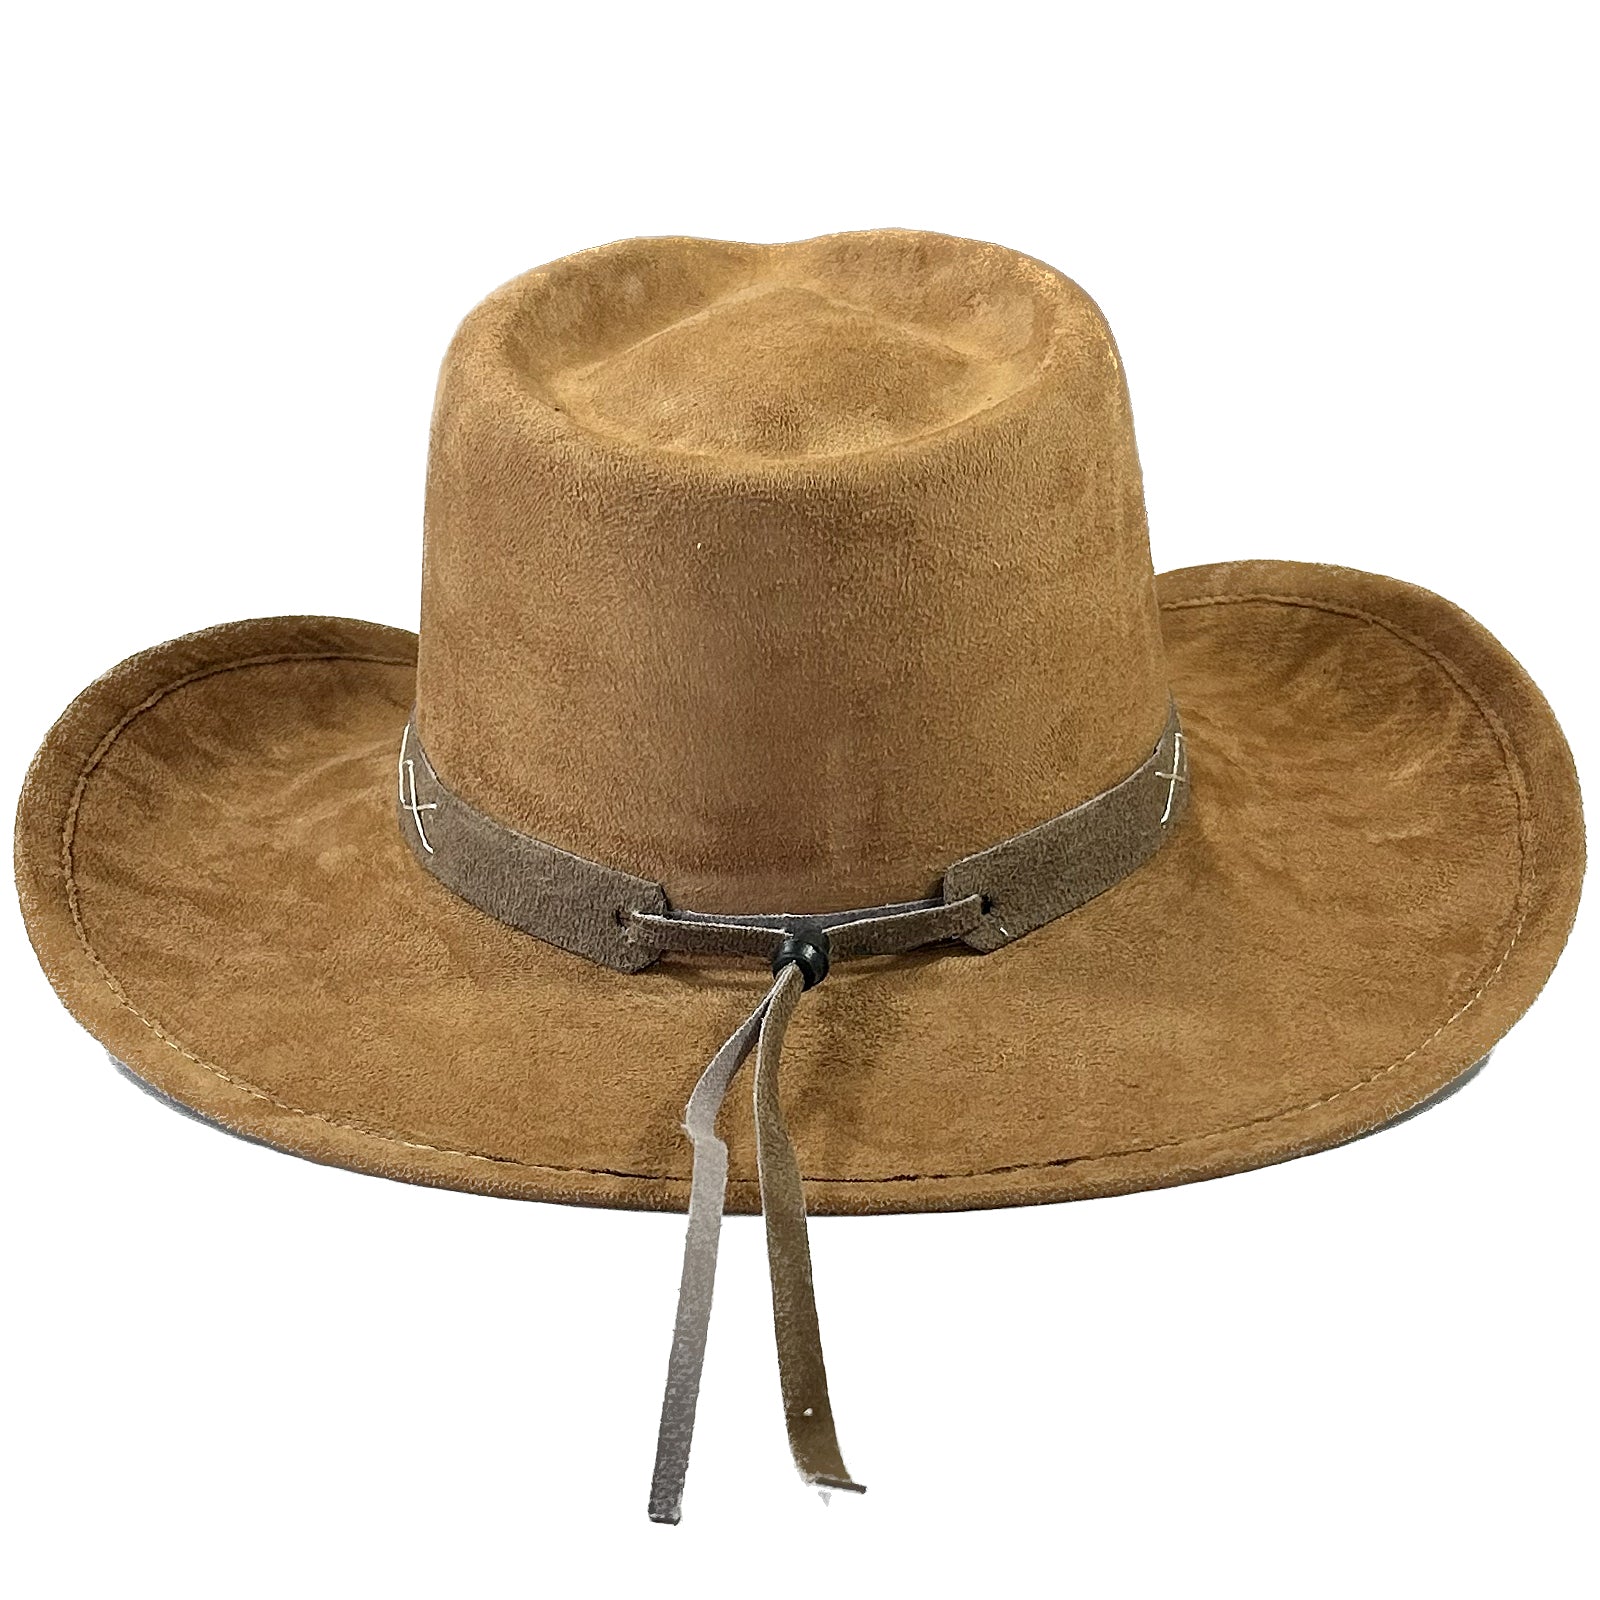 Faux Suede Cowboy Hat w/ Rope Tan Brown Black Western Hats Assorted Colors